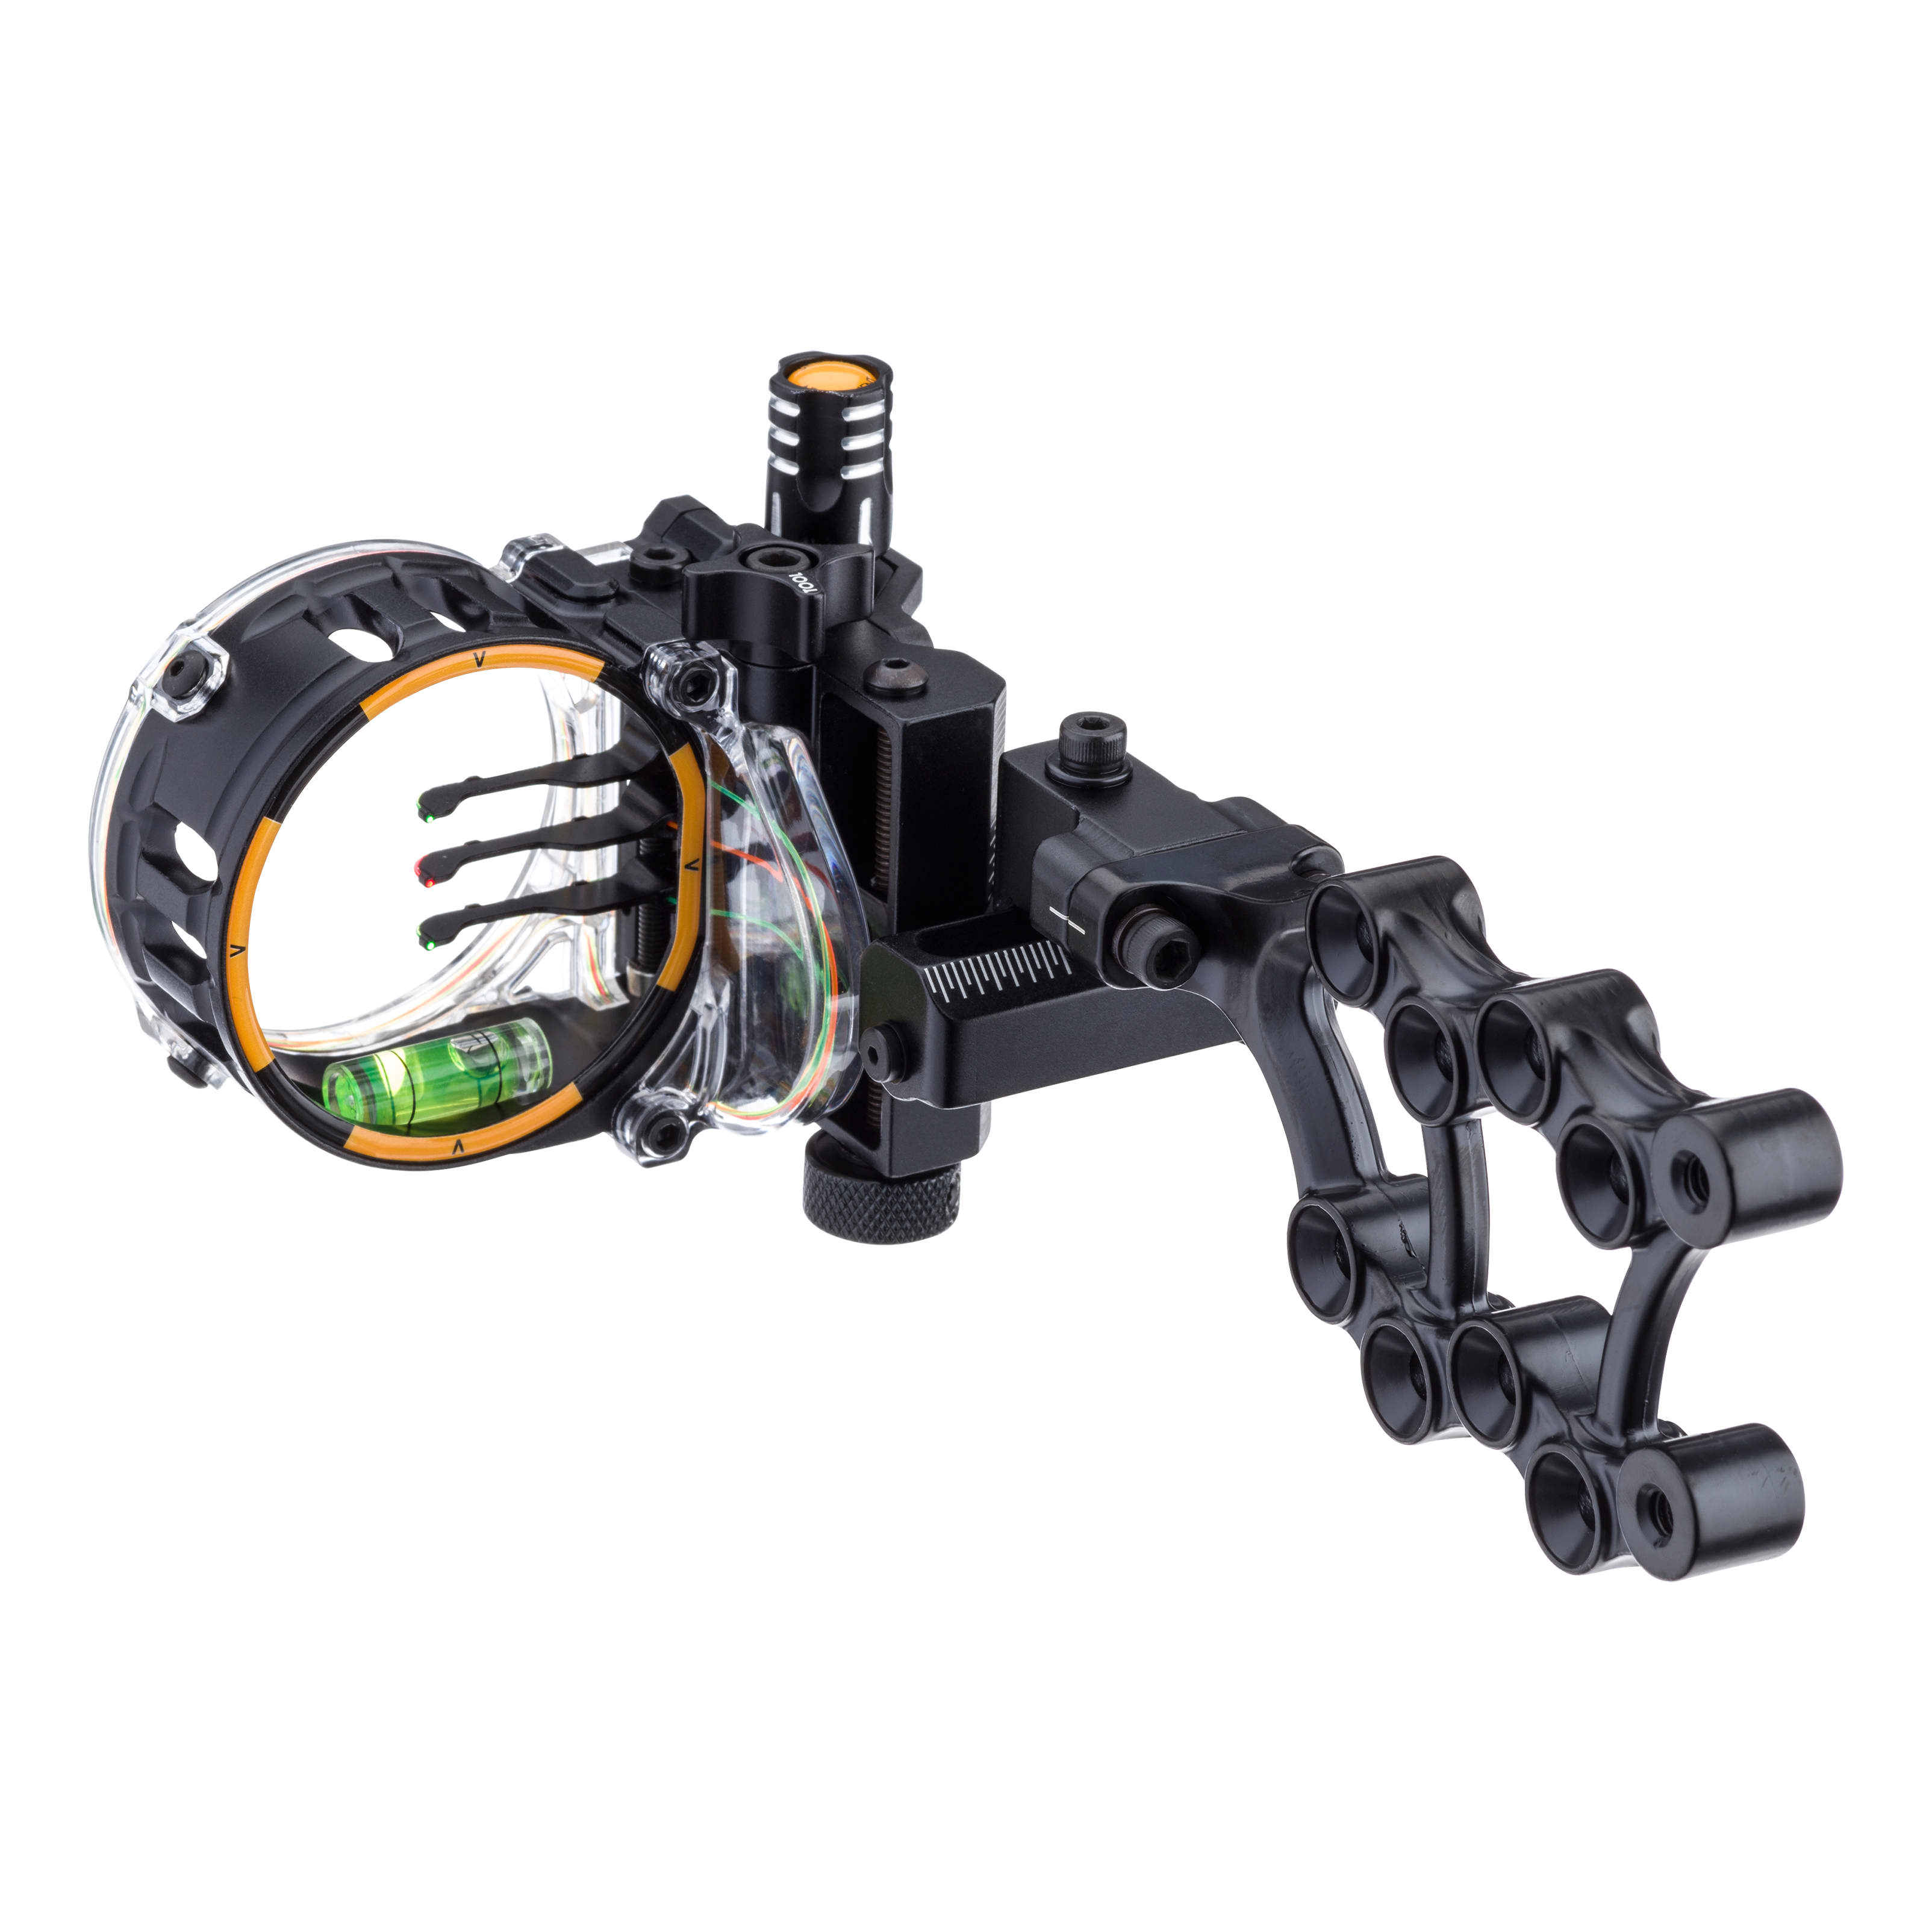 Trophy Ridge® Hotwire 3-Pin Bow Sight - Side View